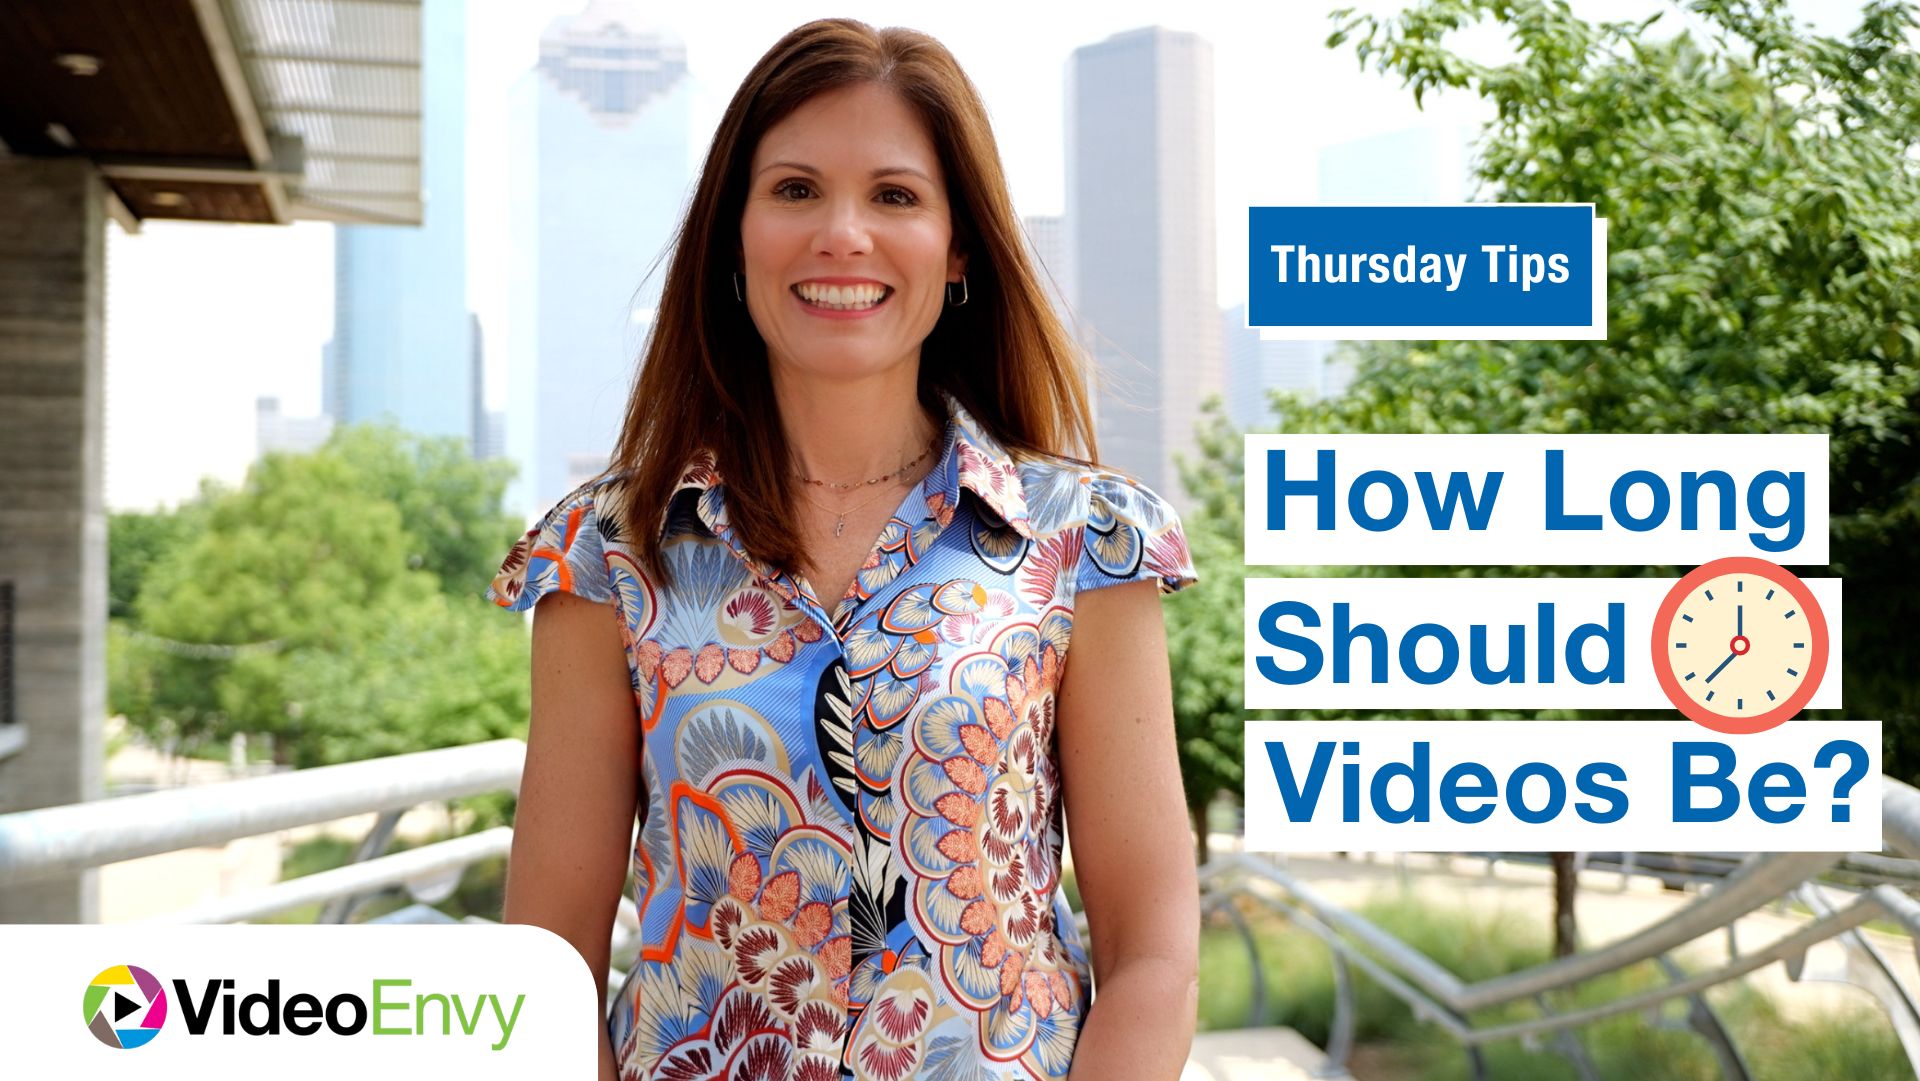 Thursday Tips: How Long Should My Video Be?